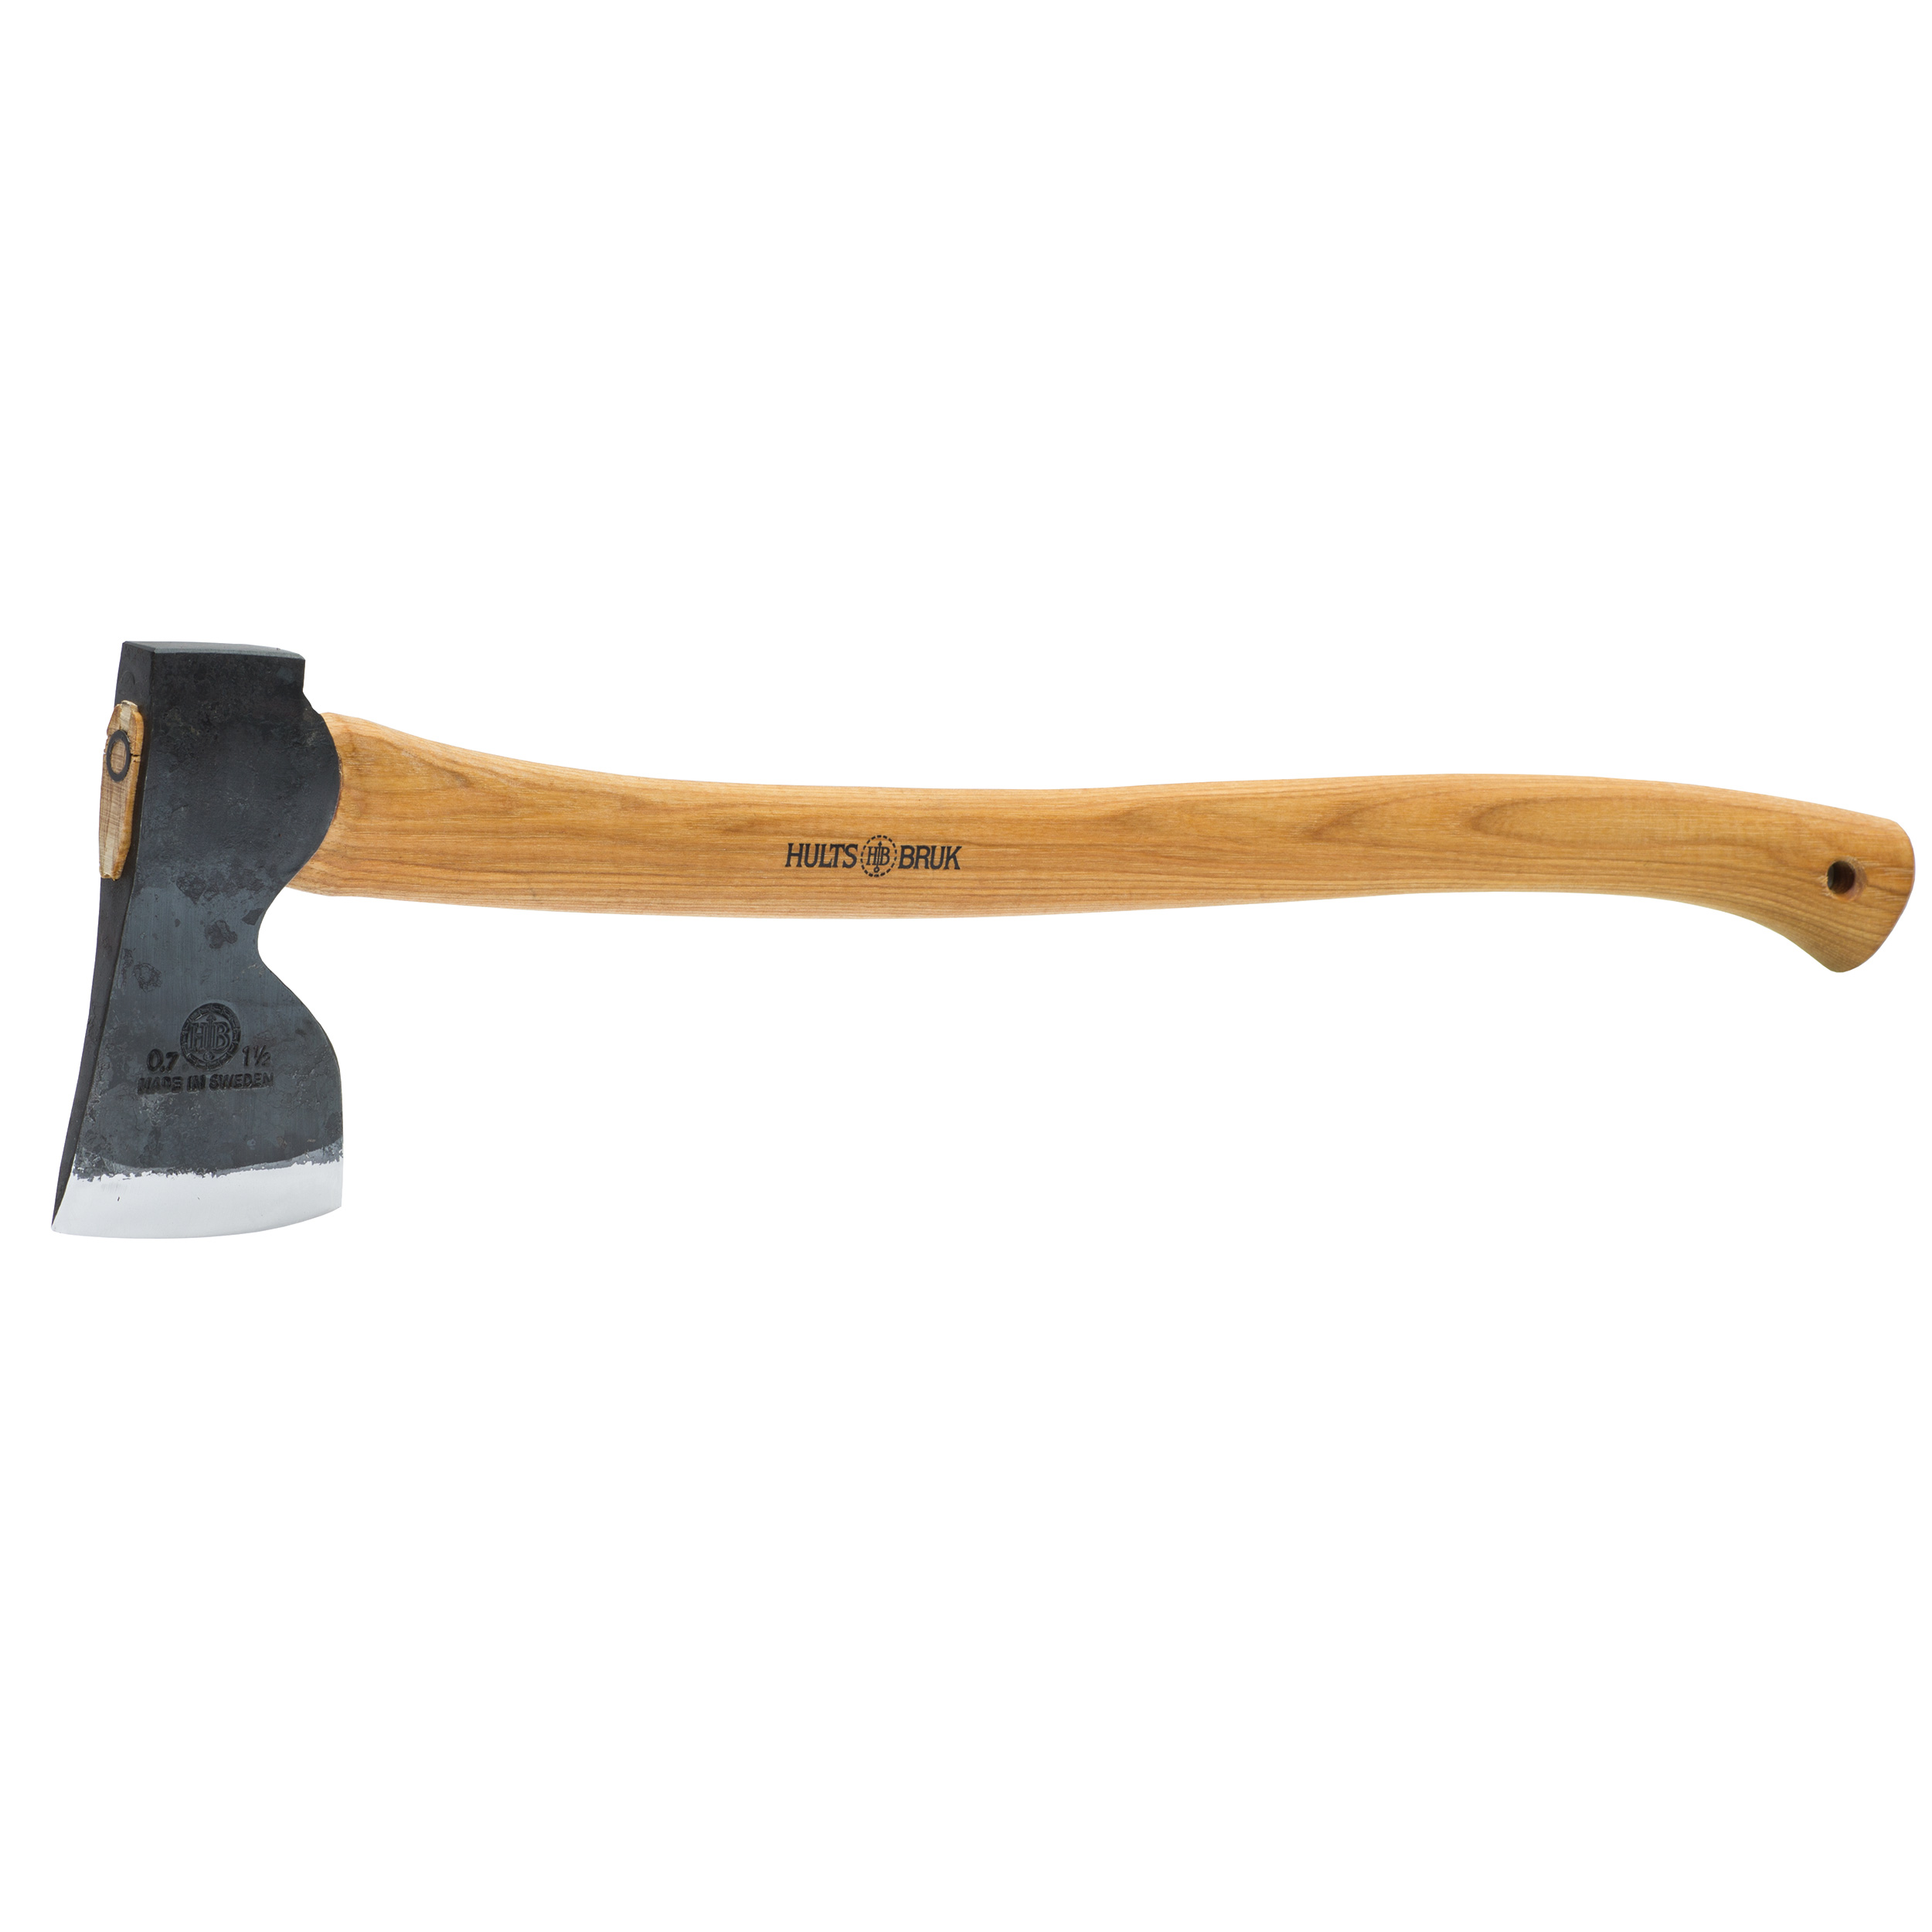 Hults Bruk Akka Foresters Axe 1.5lb 24in Handle